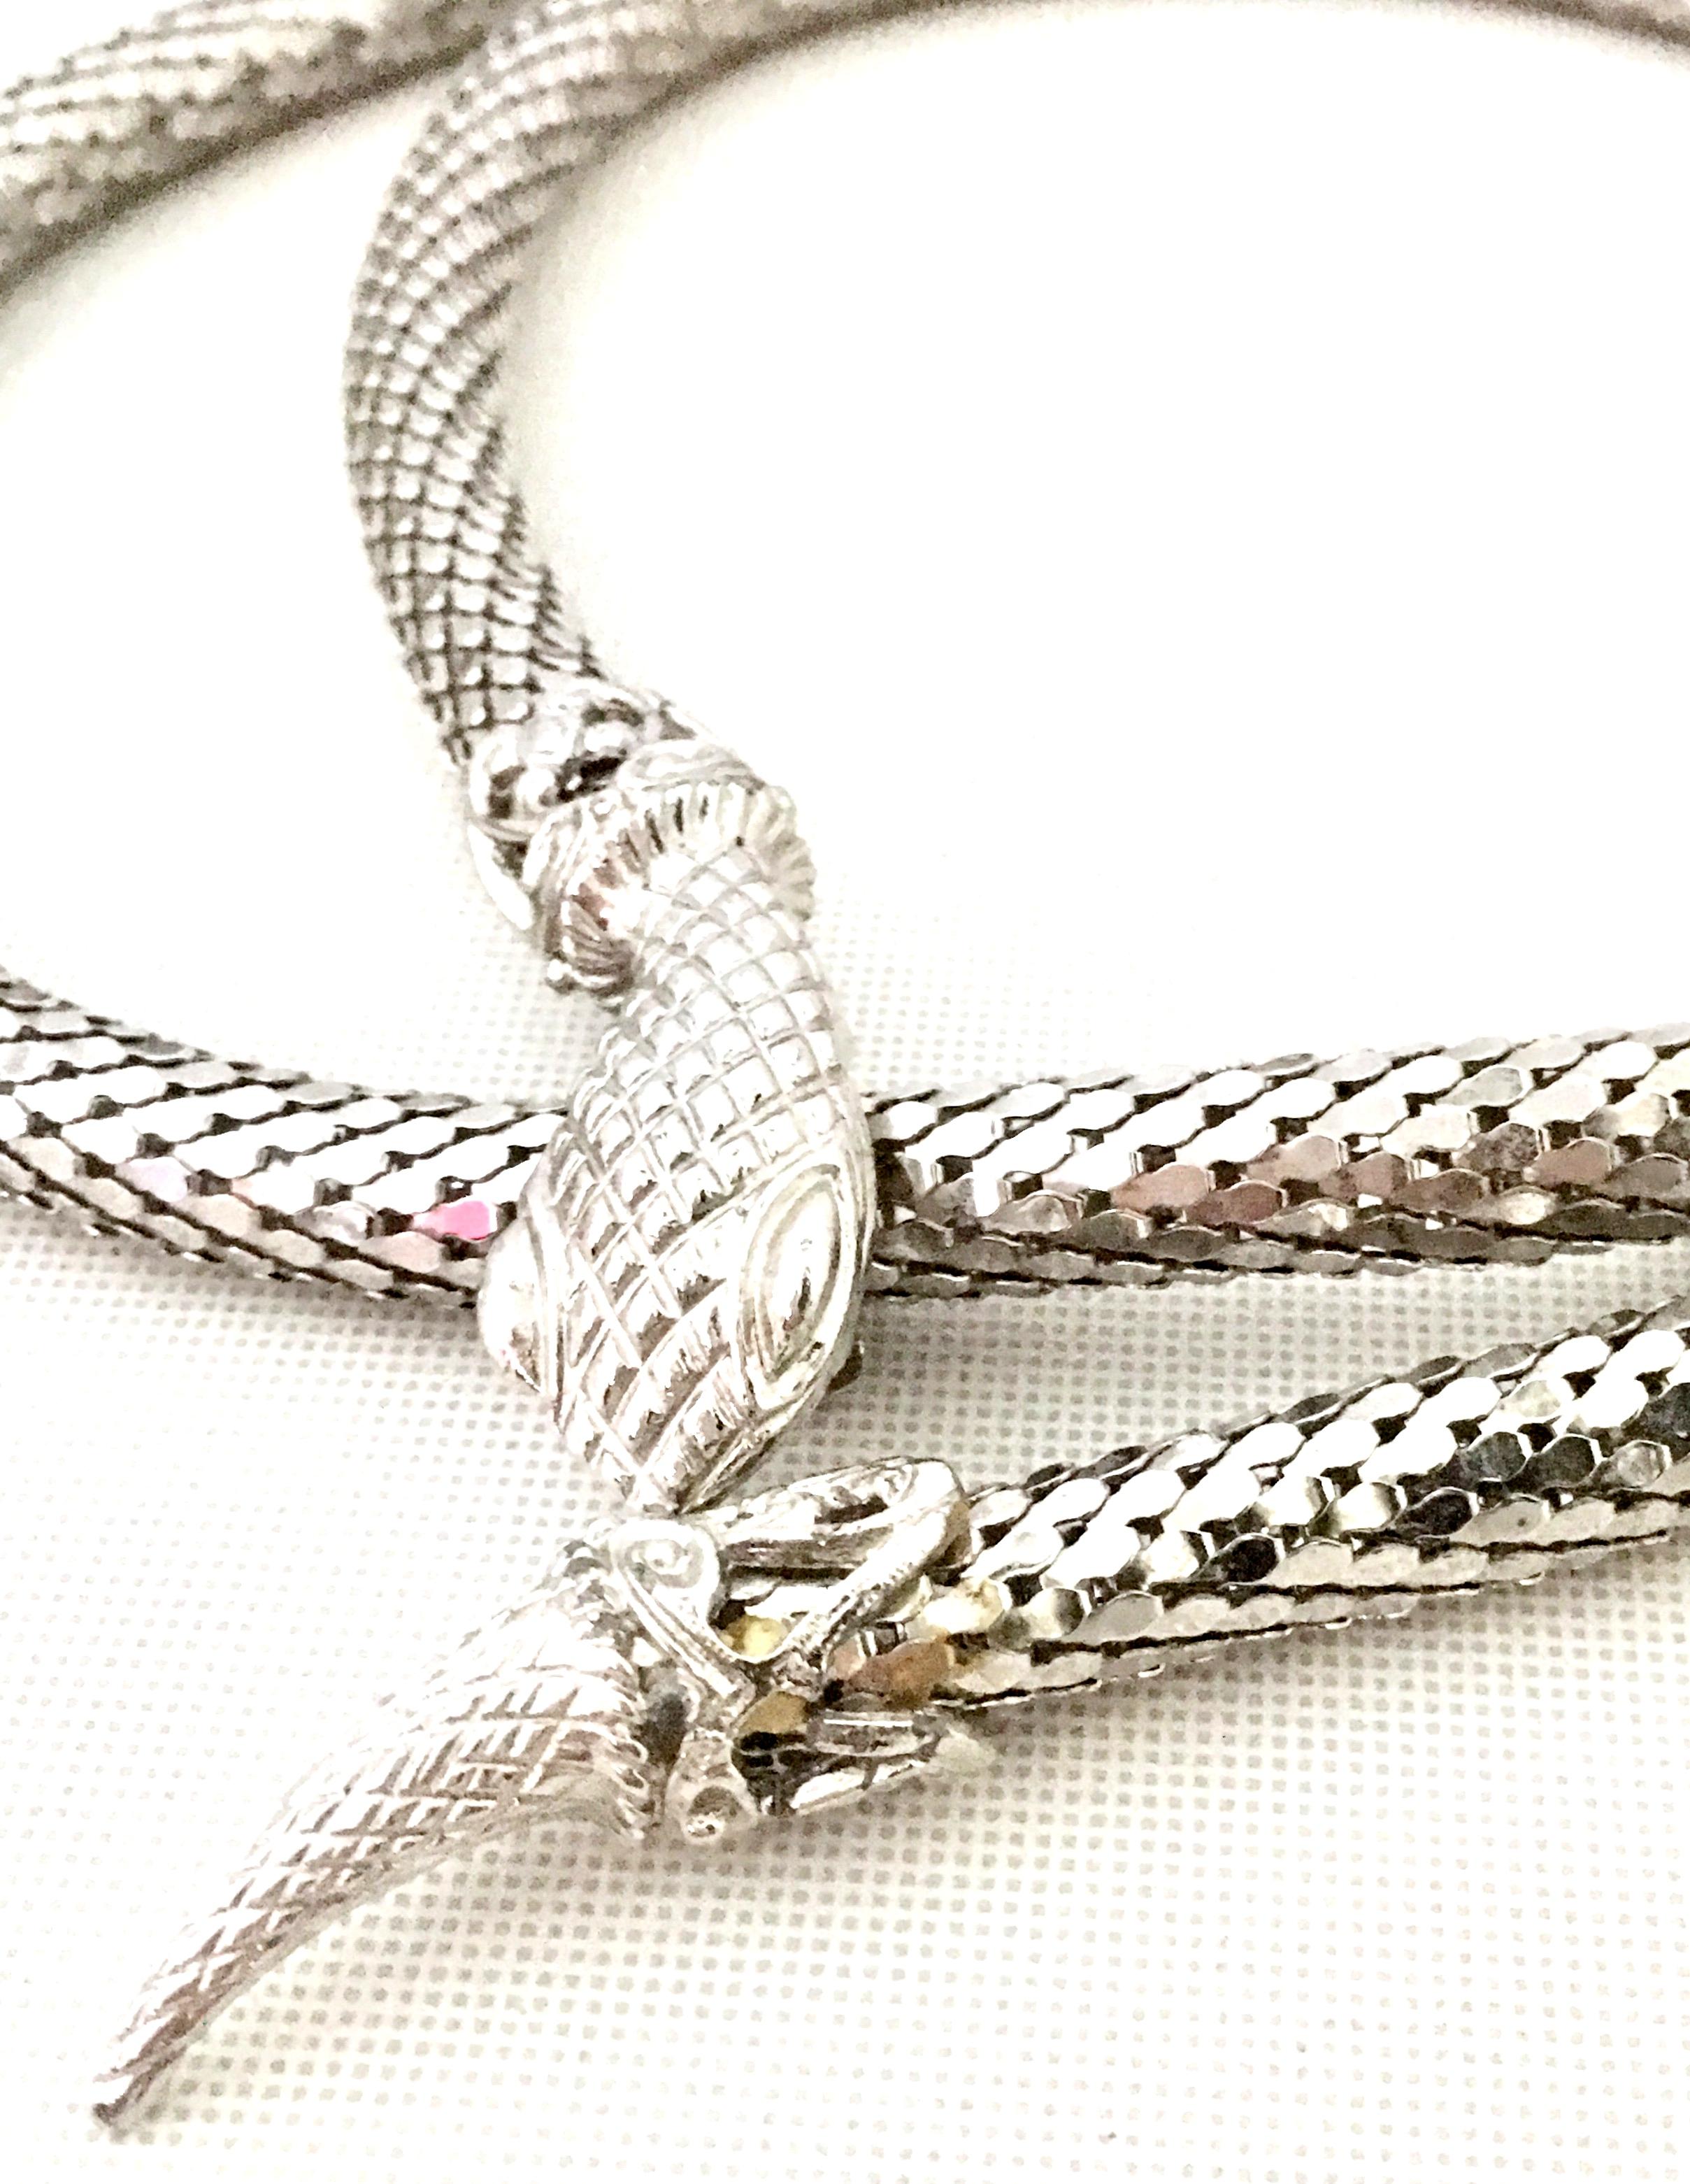 20th Century Silver Metal Mesh Snake Necklace Or Belt By, Whiting & Davis 5